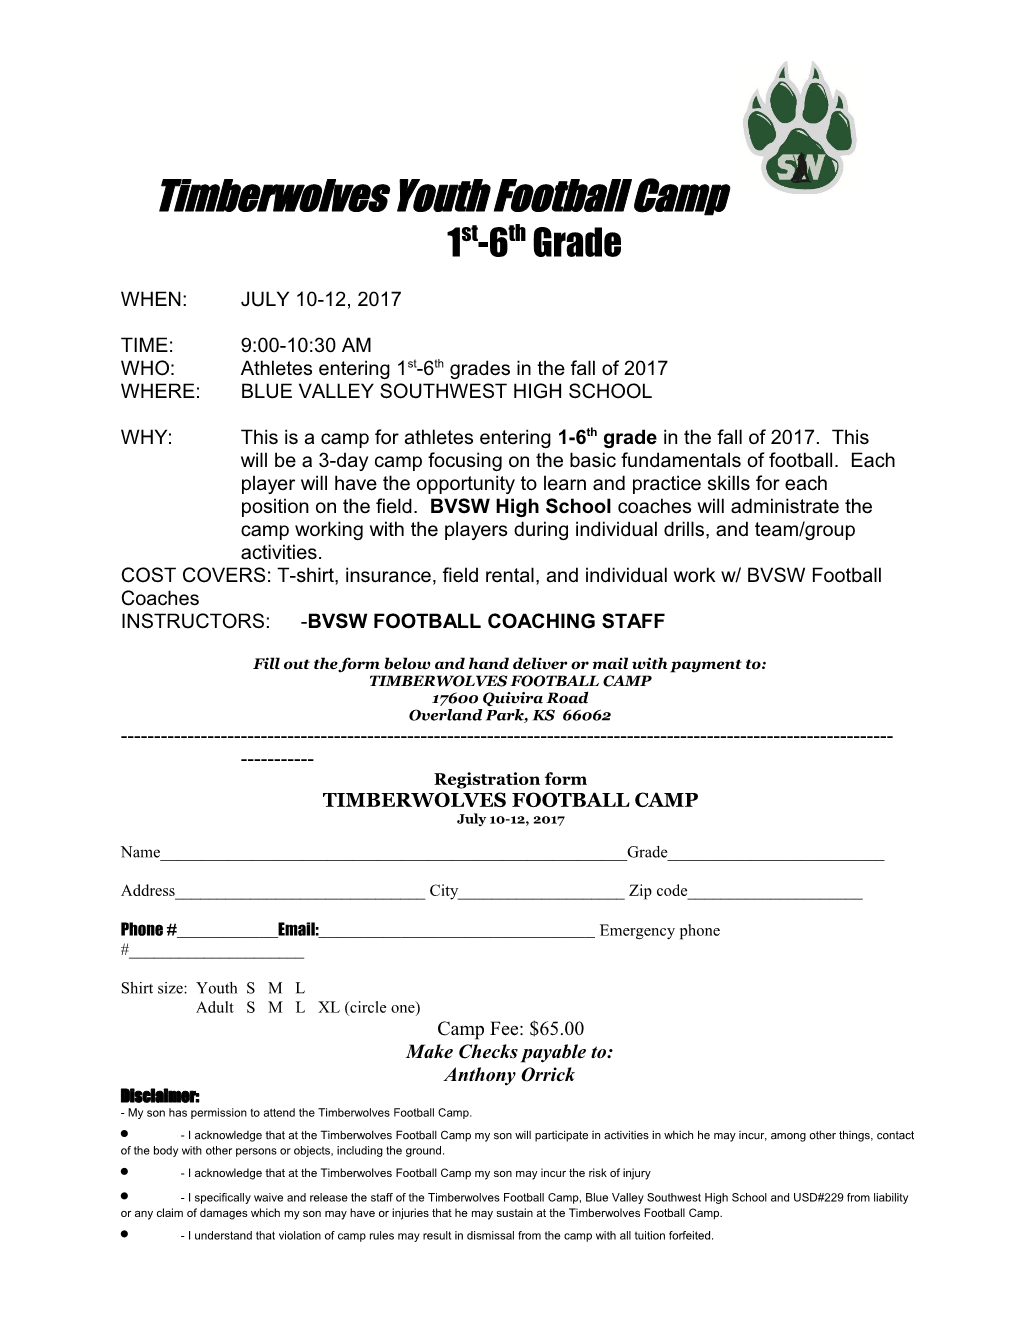 Timberwolves Youth Football Camp 1St-6Th Grade